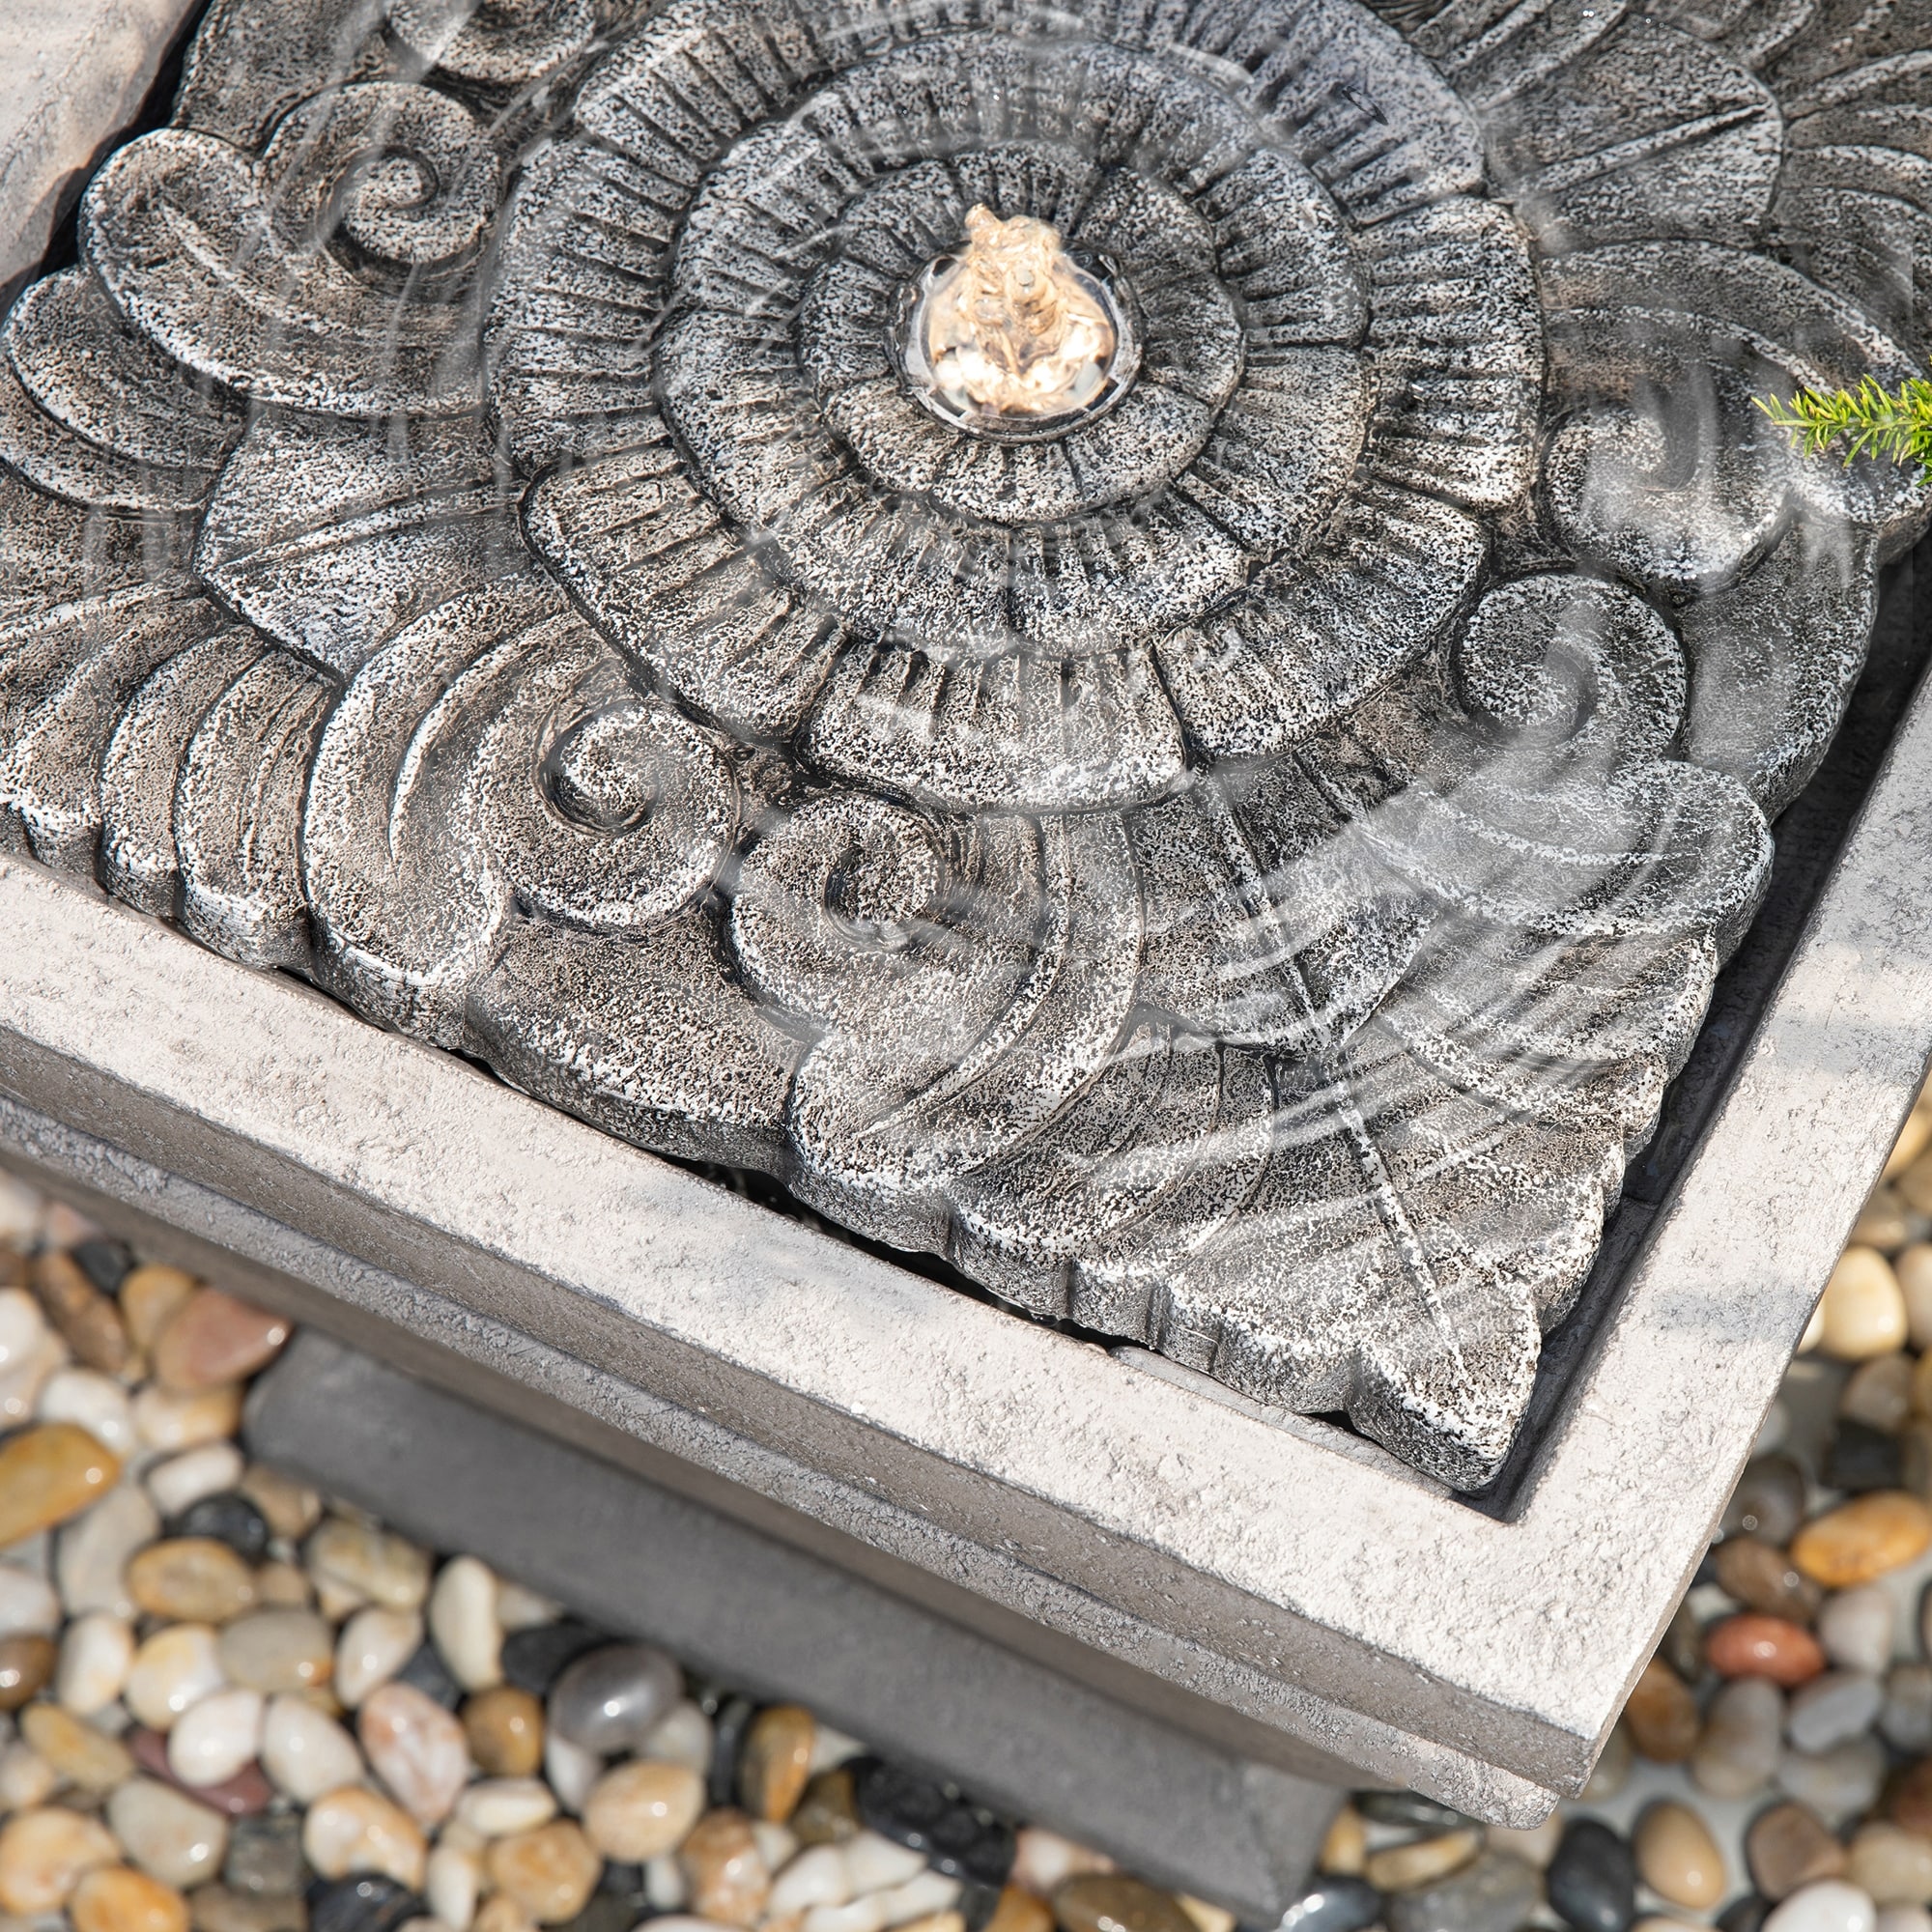 Details about   Glitzhome 17.5"H Elegant Stone Sculpture Outdoor Floor Water Fountain w/ LED New 